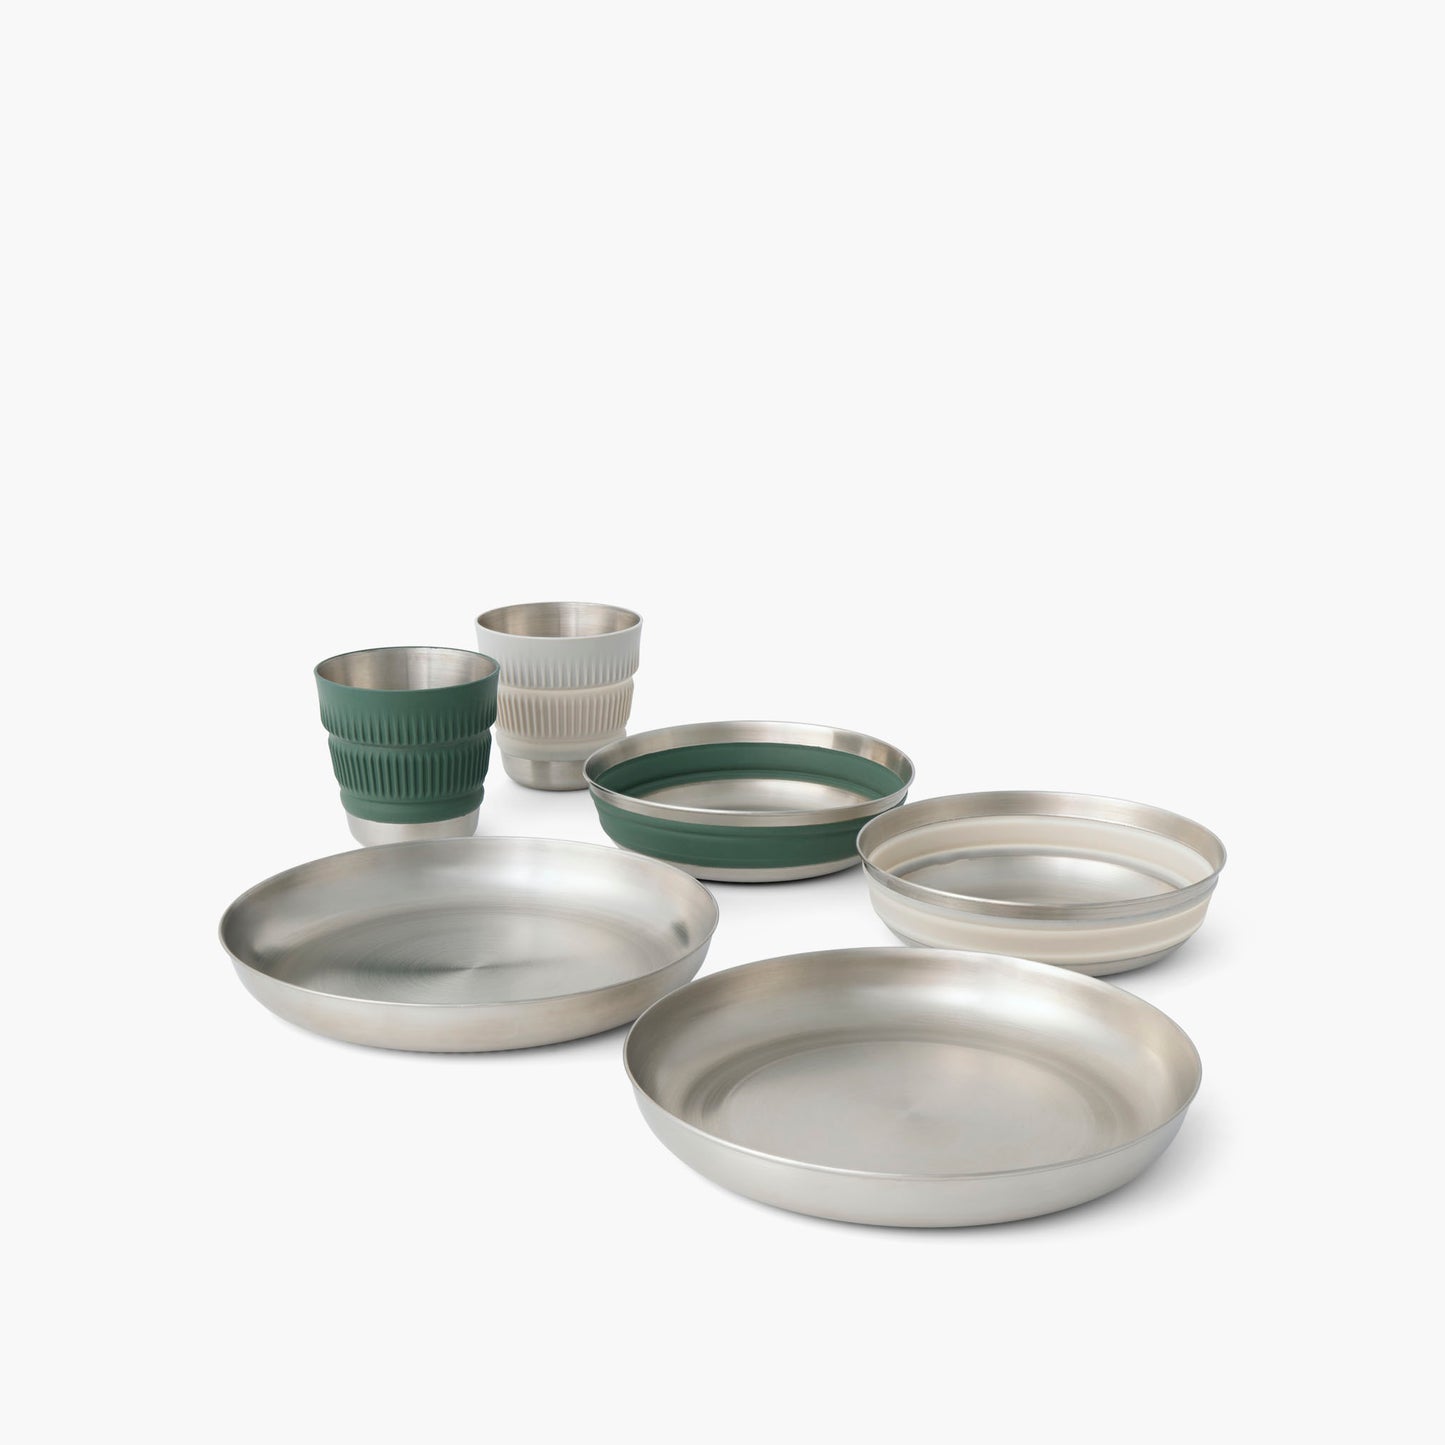 Sea To Summit Detour Stainless Steel Collapsible Dinnerware Set - 2P 6 Piece